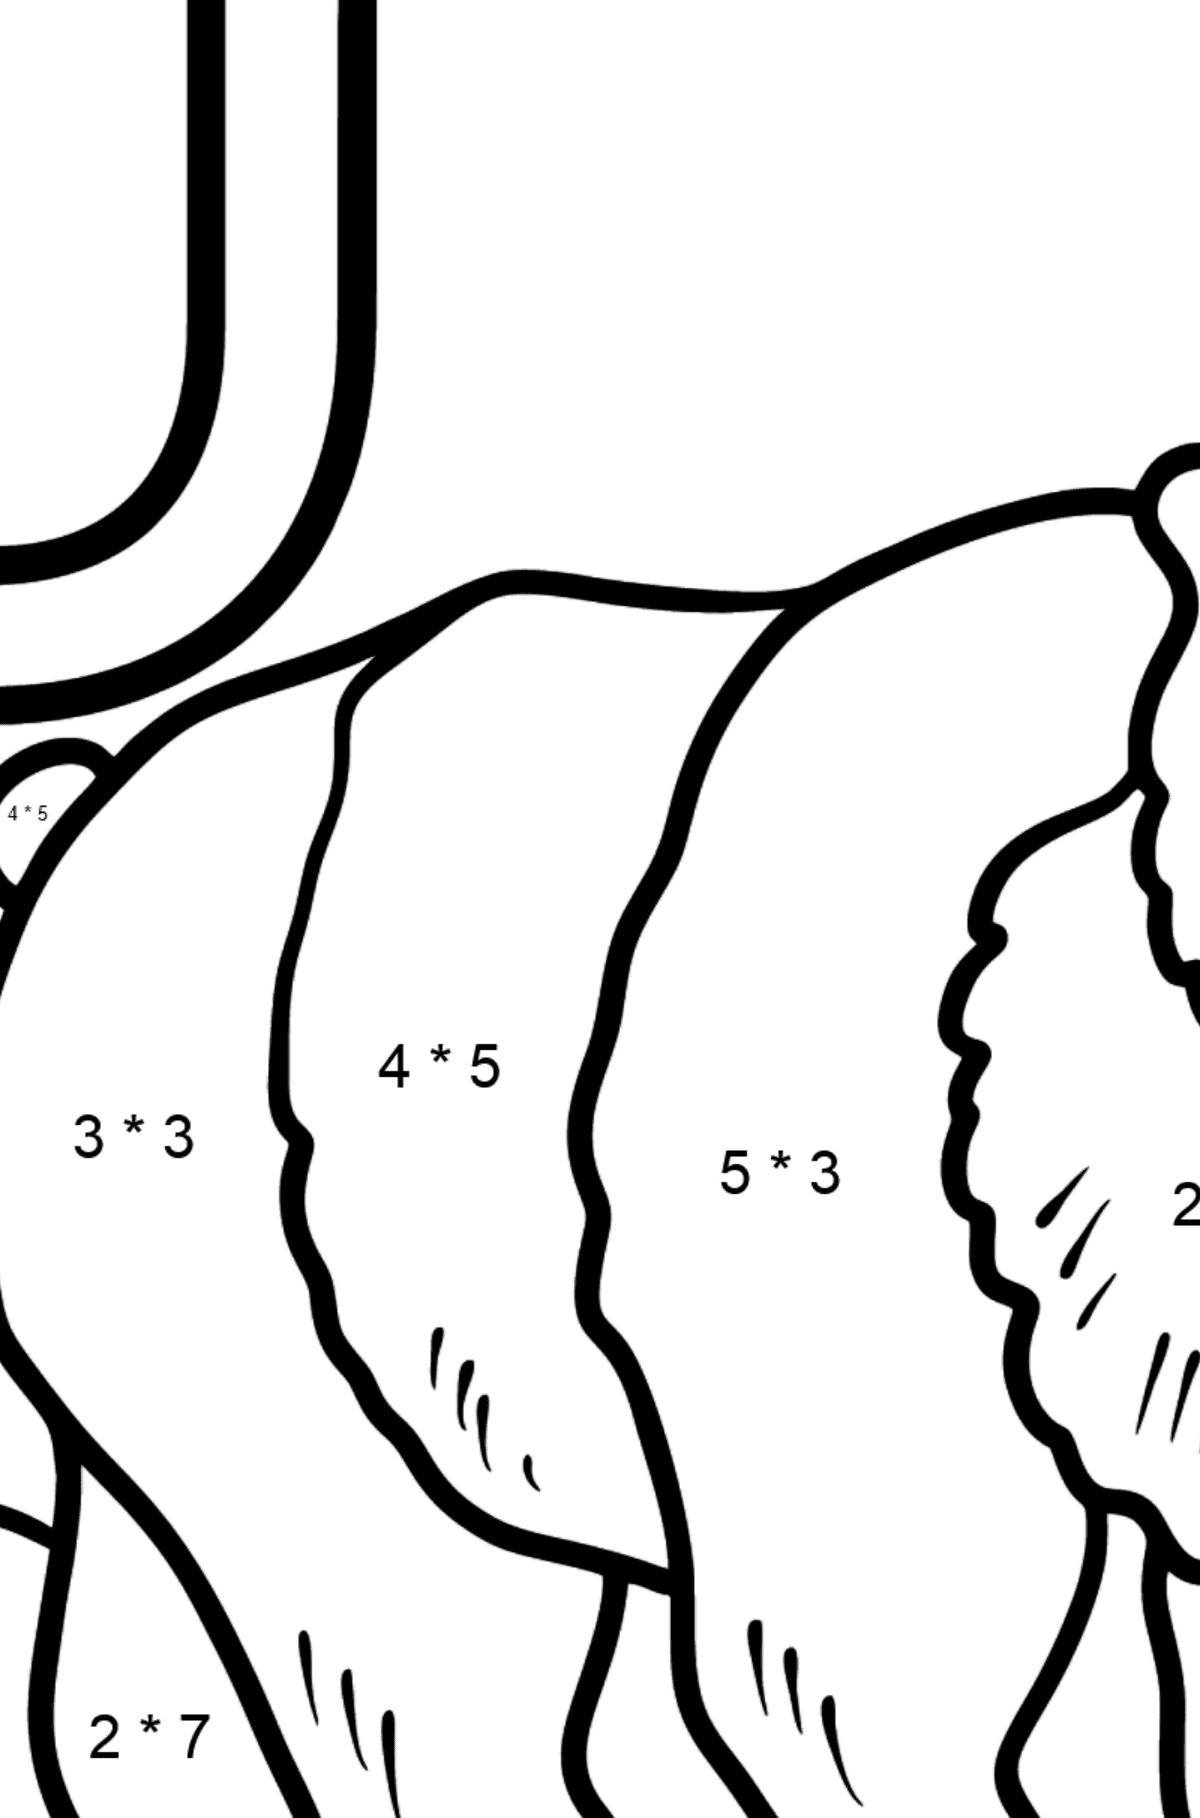 Portuguese Letter U coloring pages - URSO - Math Coloring - Multiplication for Kids